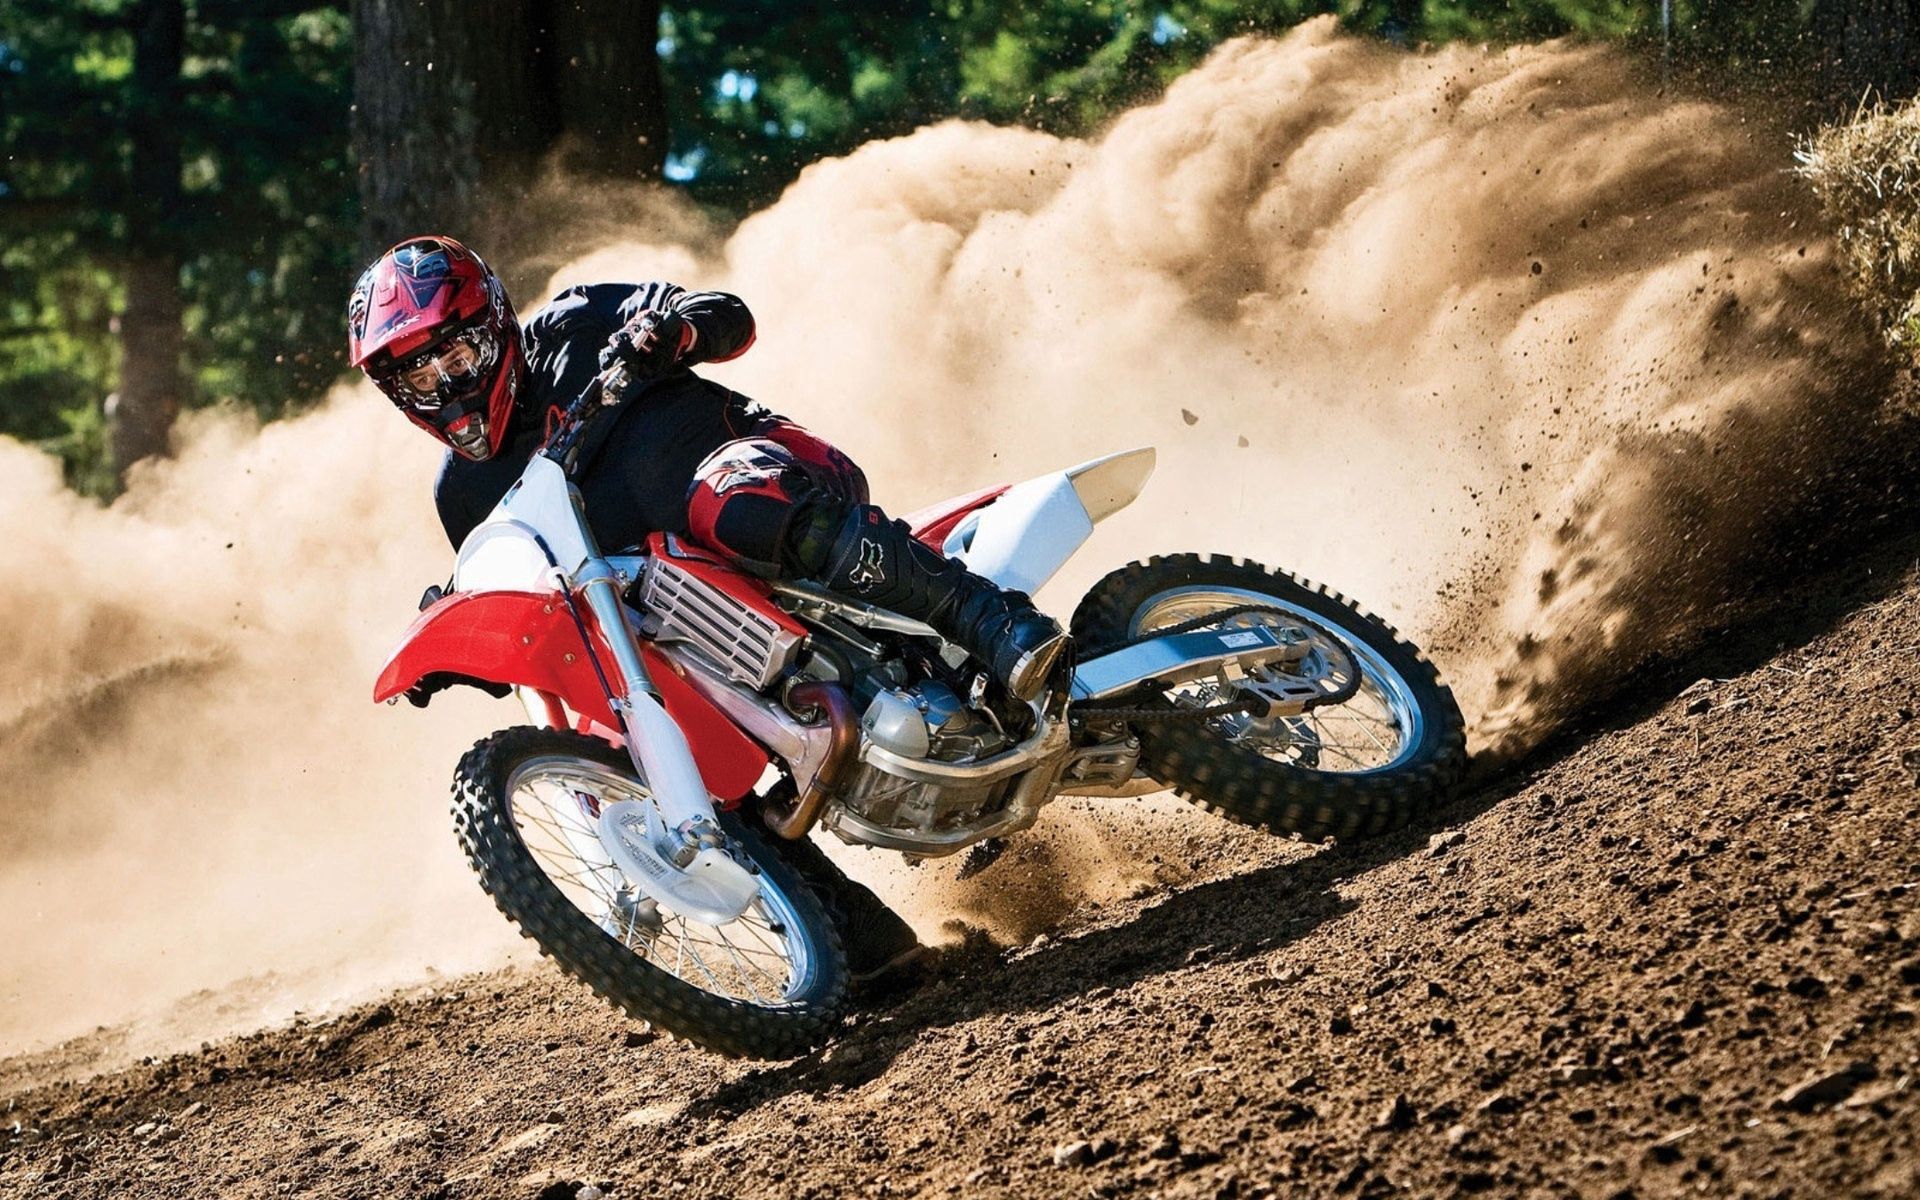 138148 download wallpaper motorcycles, speed, dust, race, skid screensavers and pictures for free